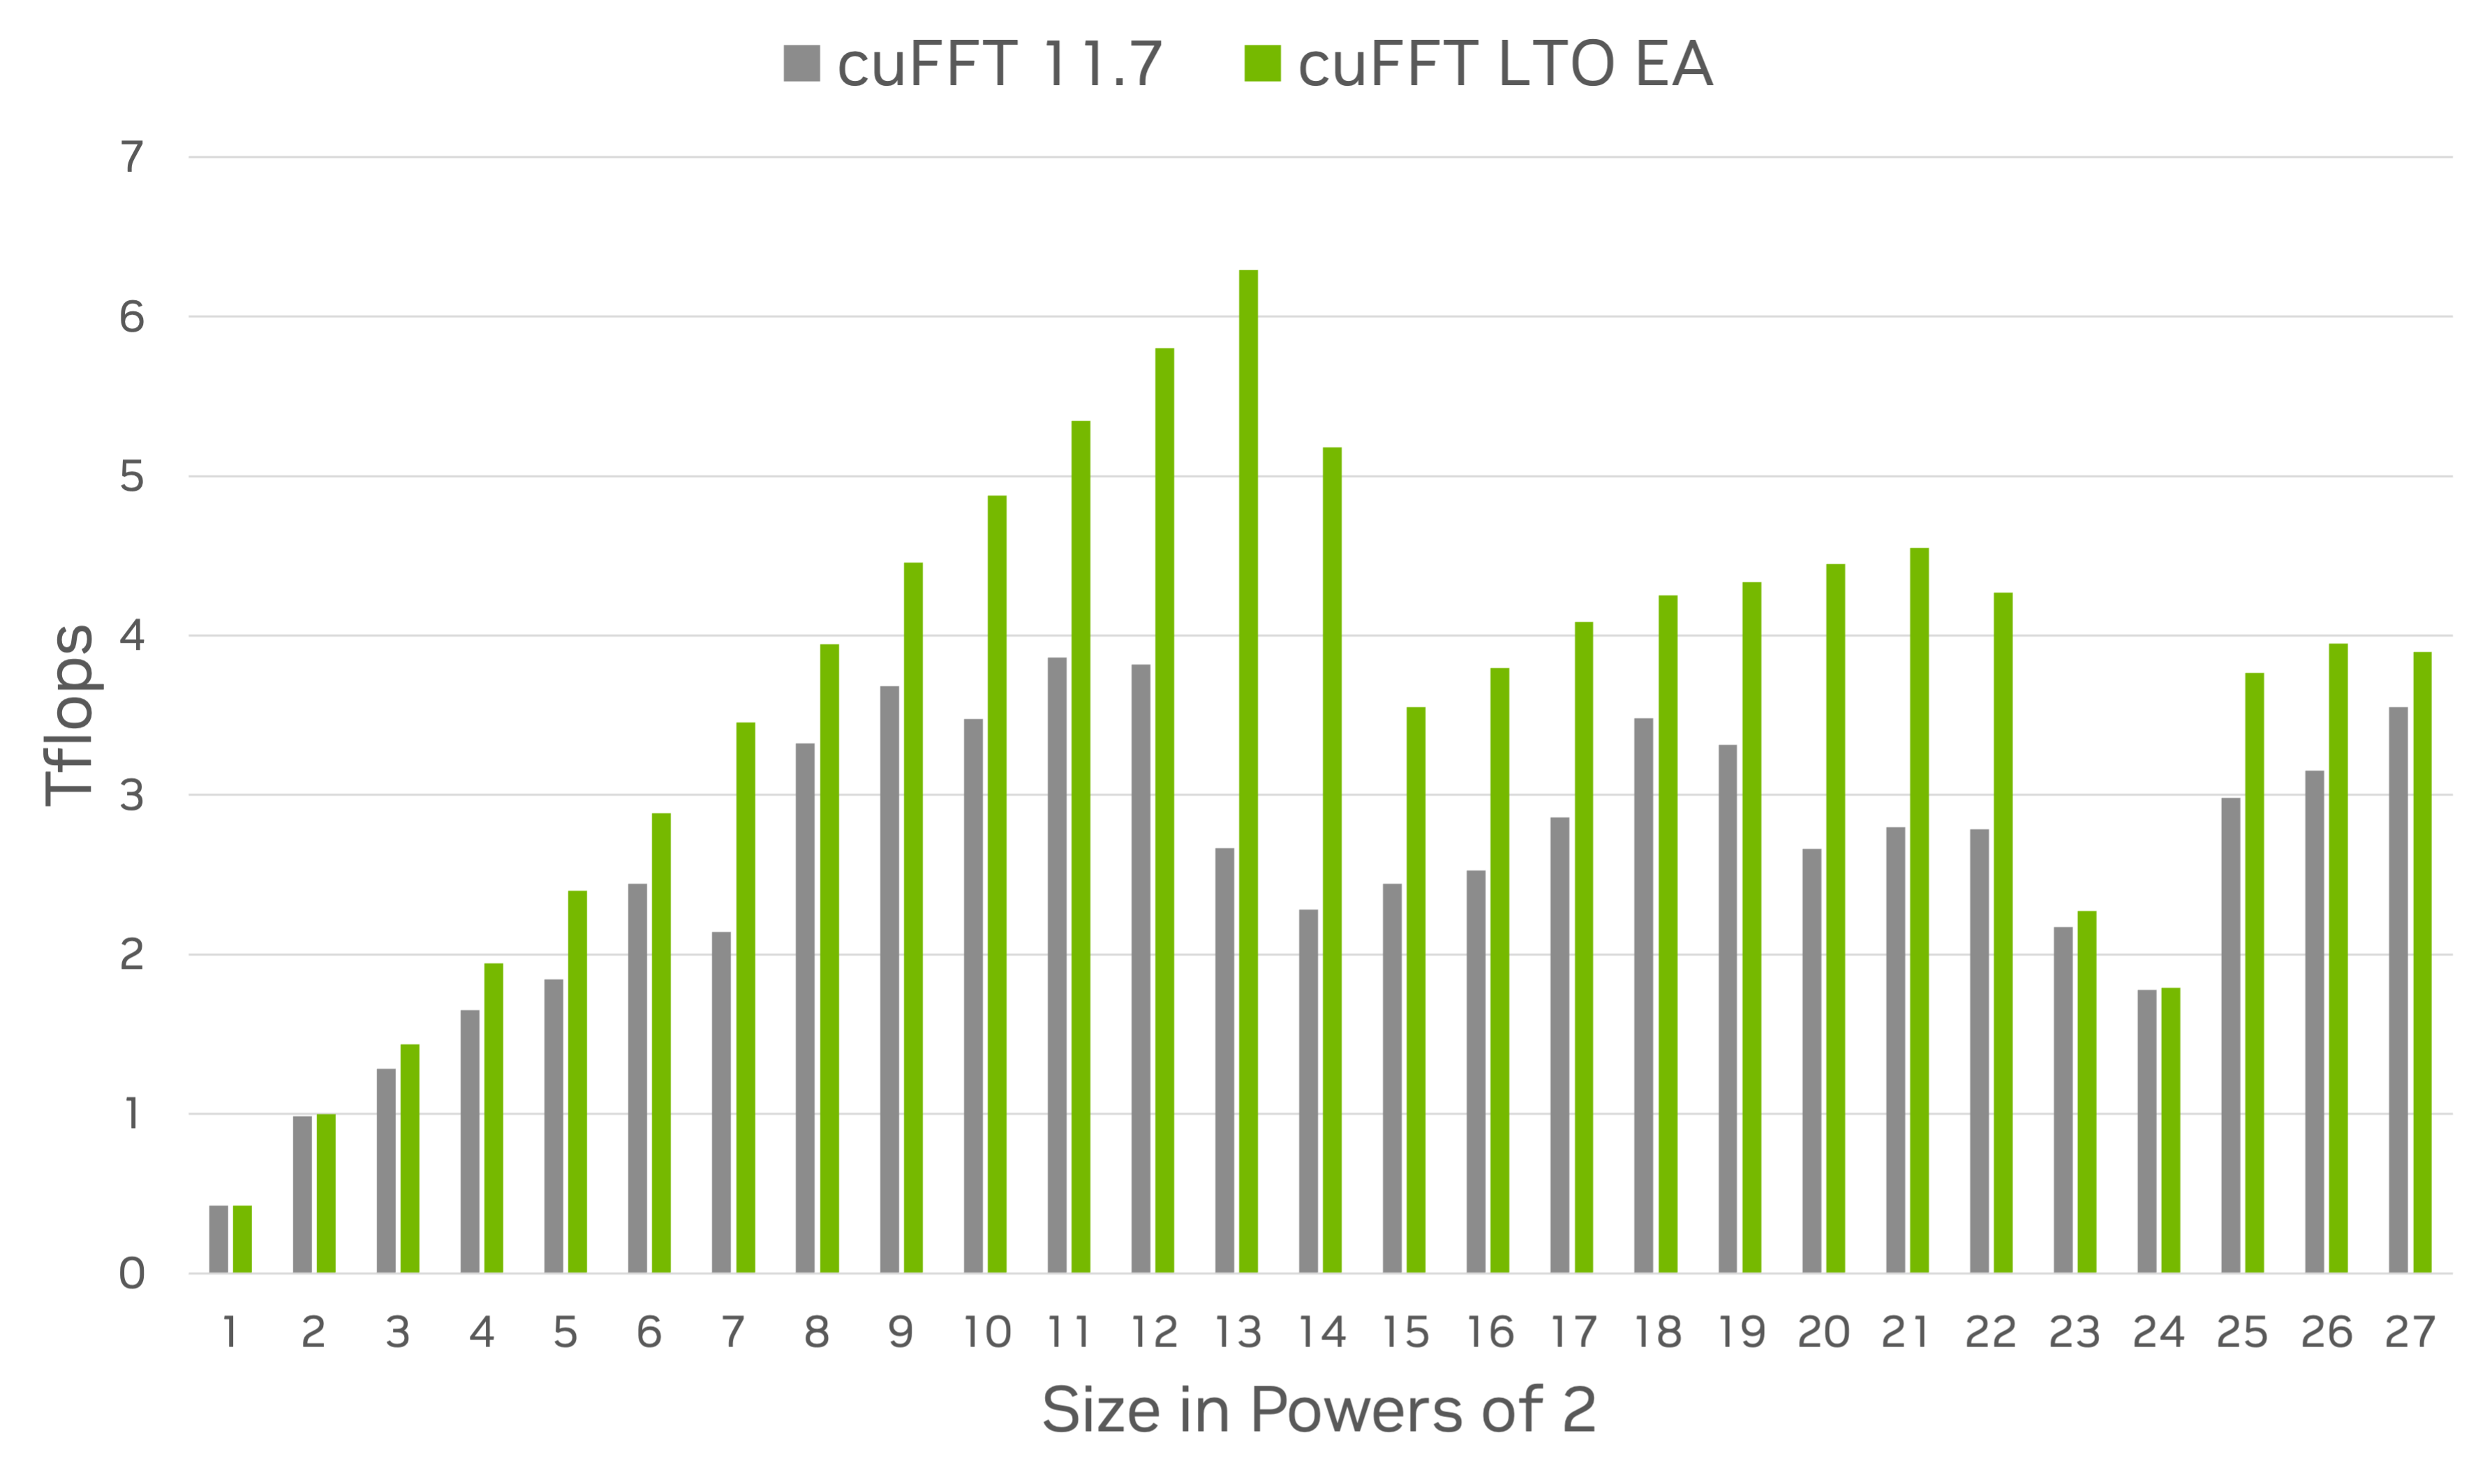 The chart compares performance of running Complex-To-Complex FFTs between cuFFT LTO EA and cuFFT 11.7